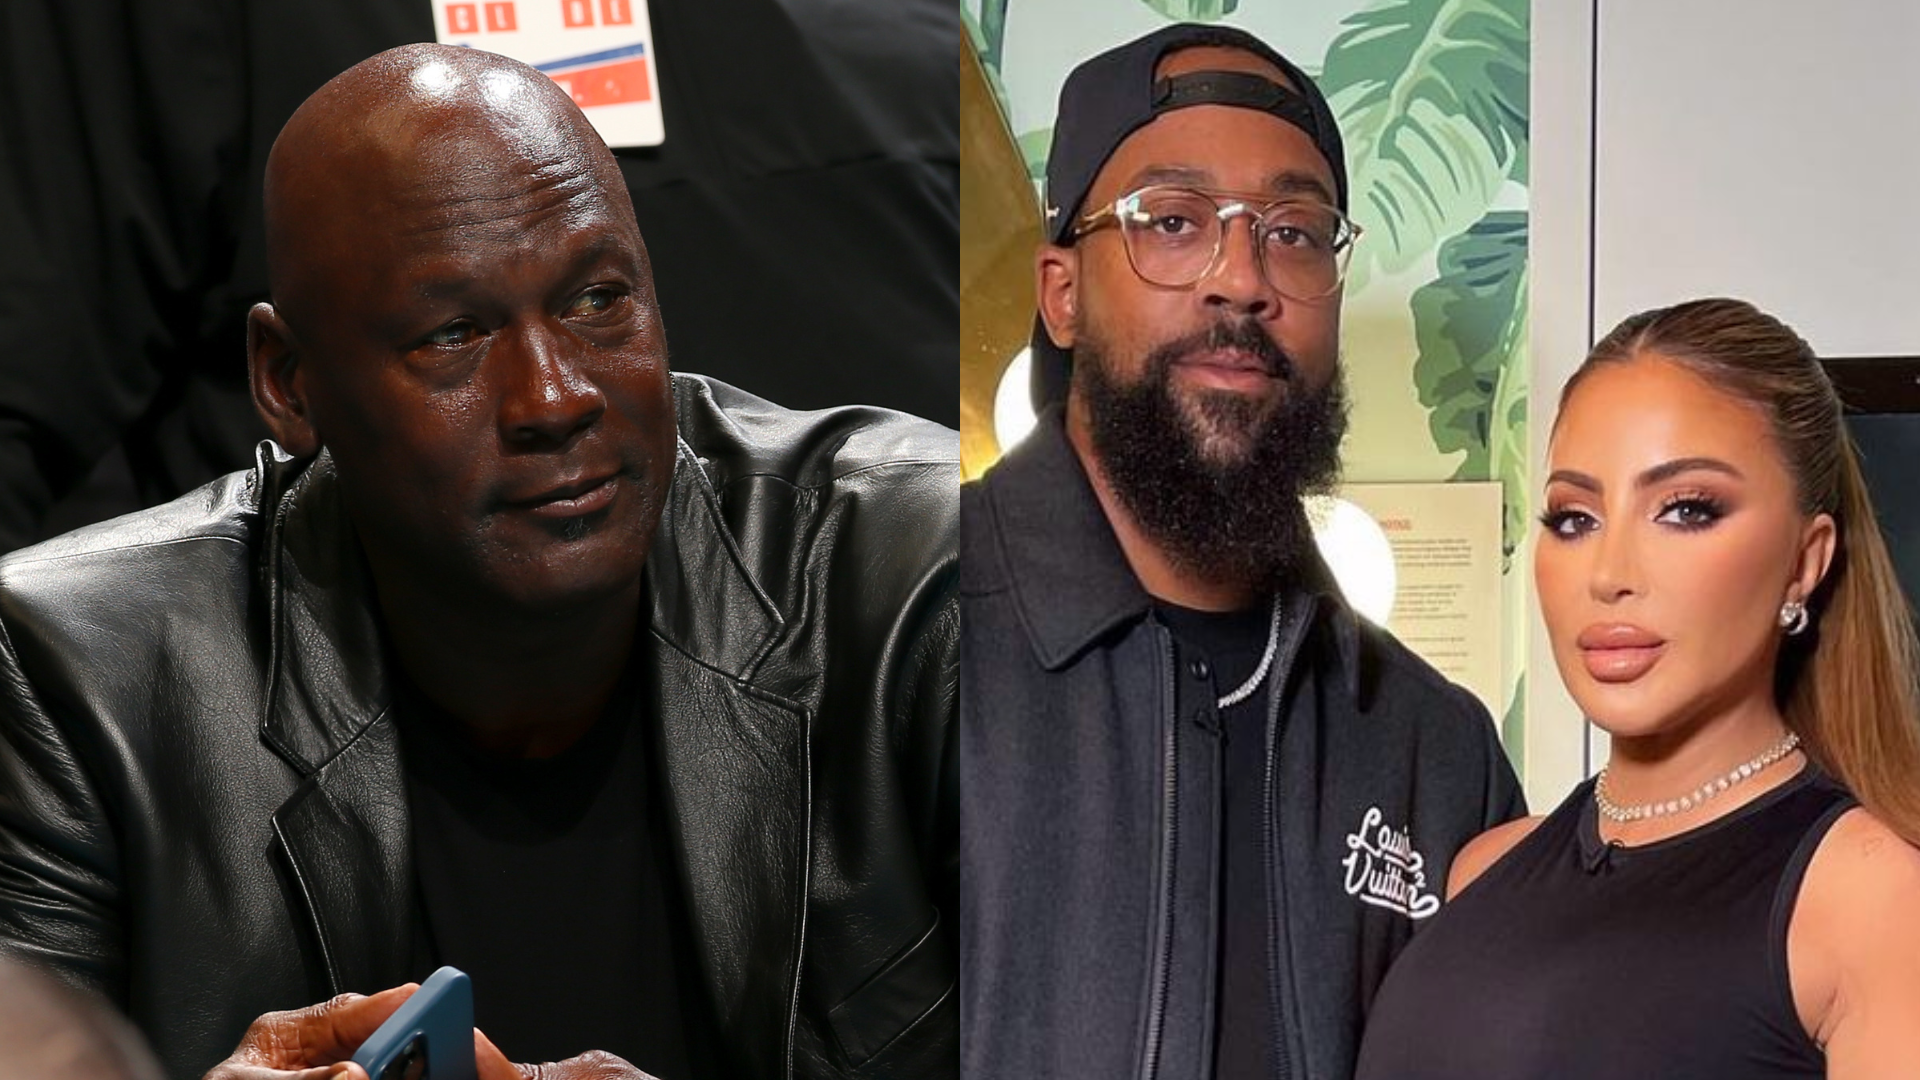 Larsa Pippen Upset After Michael Jordan Disapproved Her and Marcus Jordan Relationship Complex image